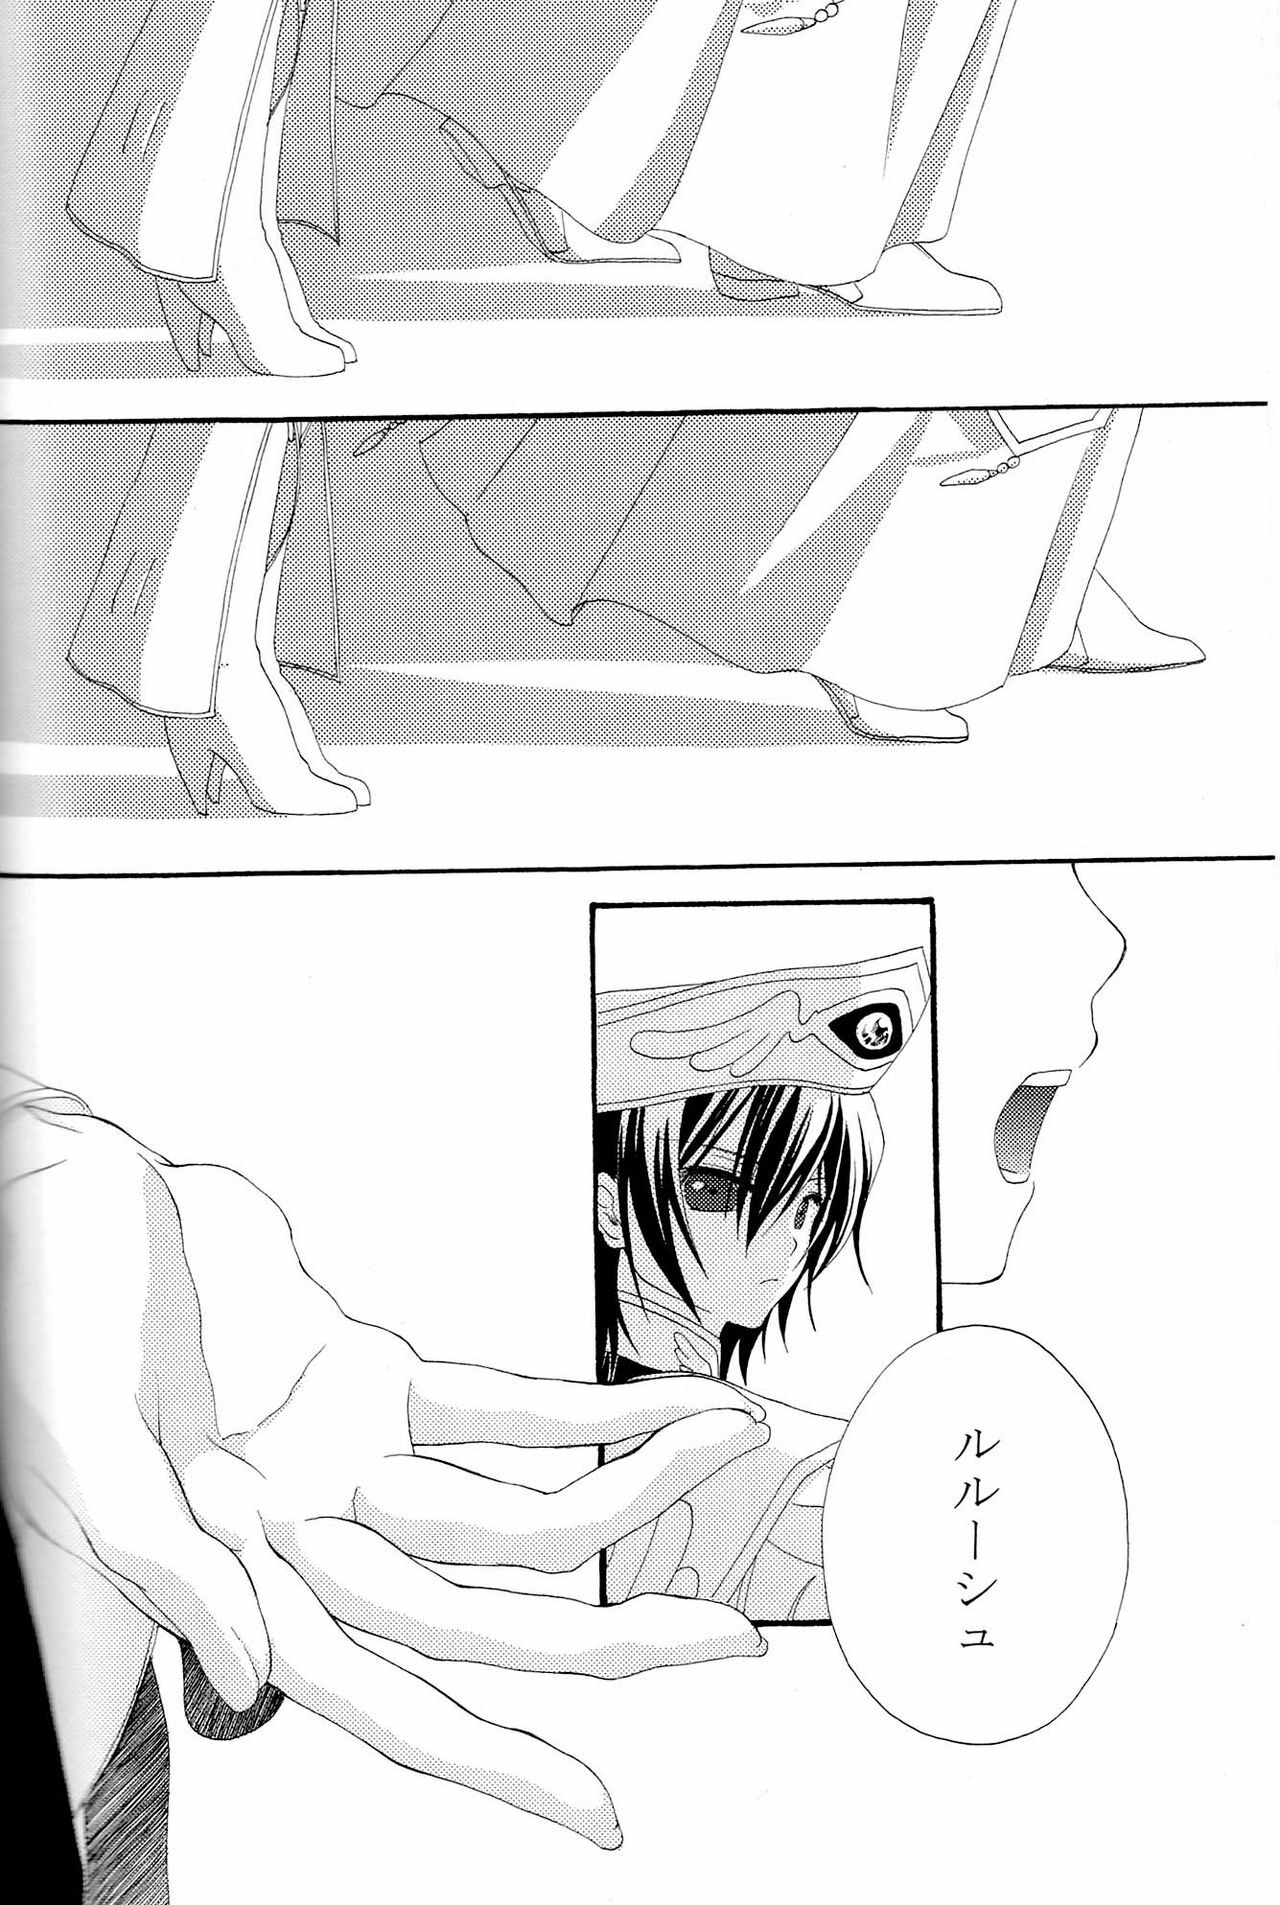 [APRICOT TEA] The last love letter presented to my dear only partner. (Code Geass) page 45 full